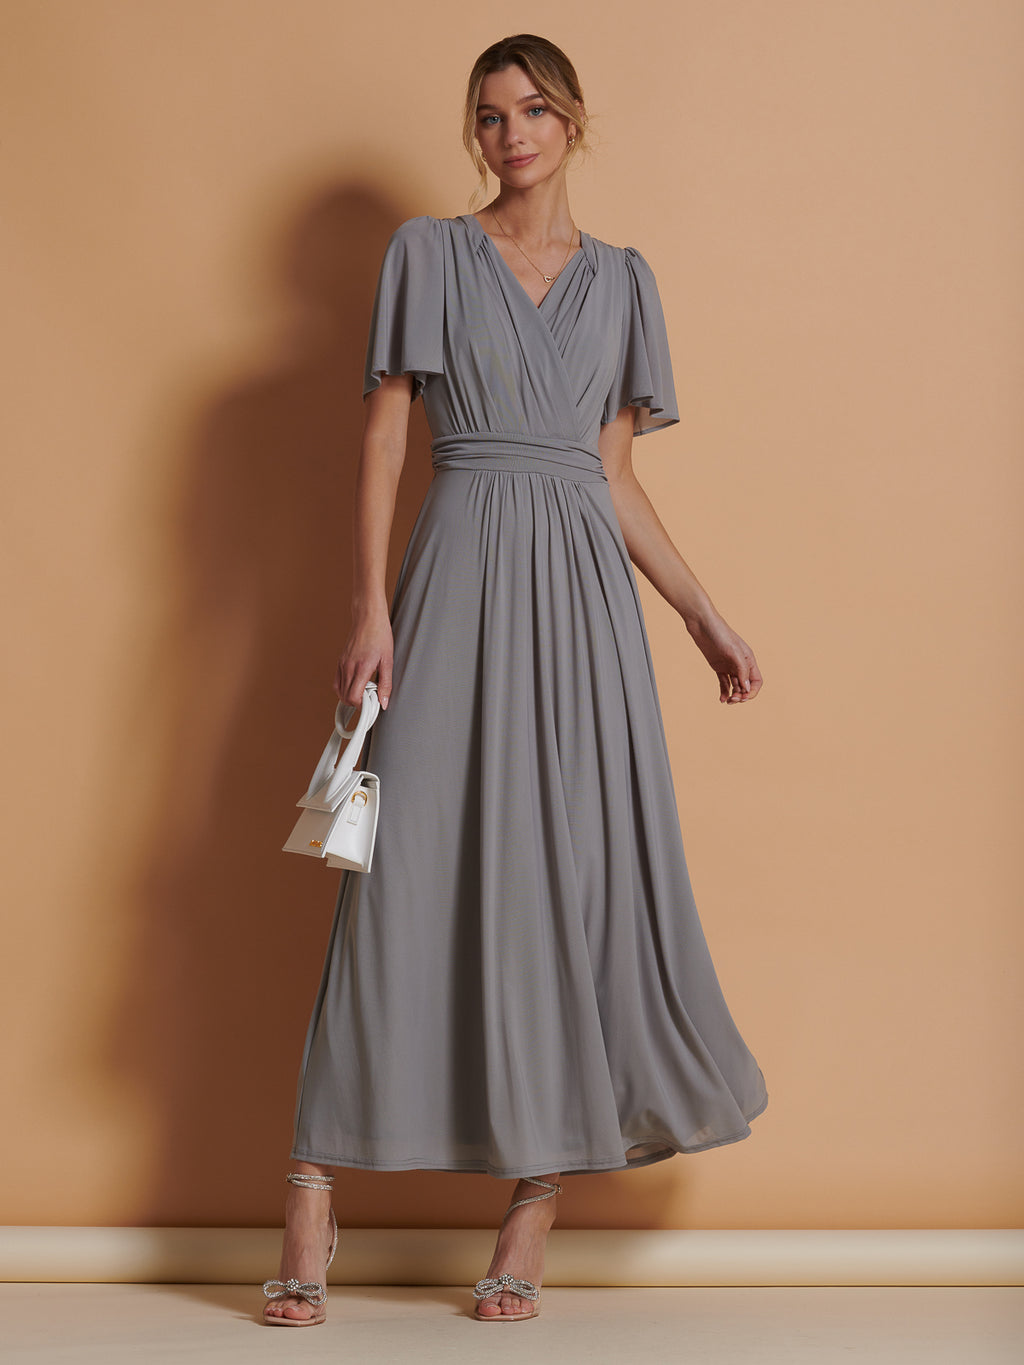 Soma Women's Dresses On Sale Up To 90% Off Retail